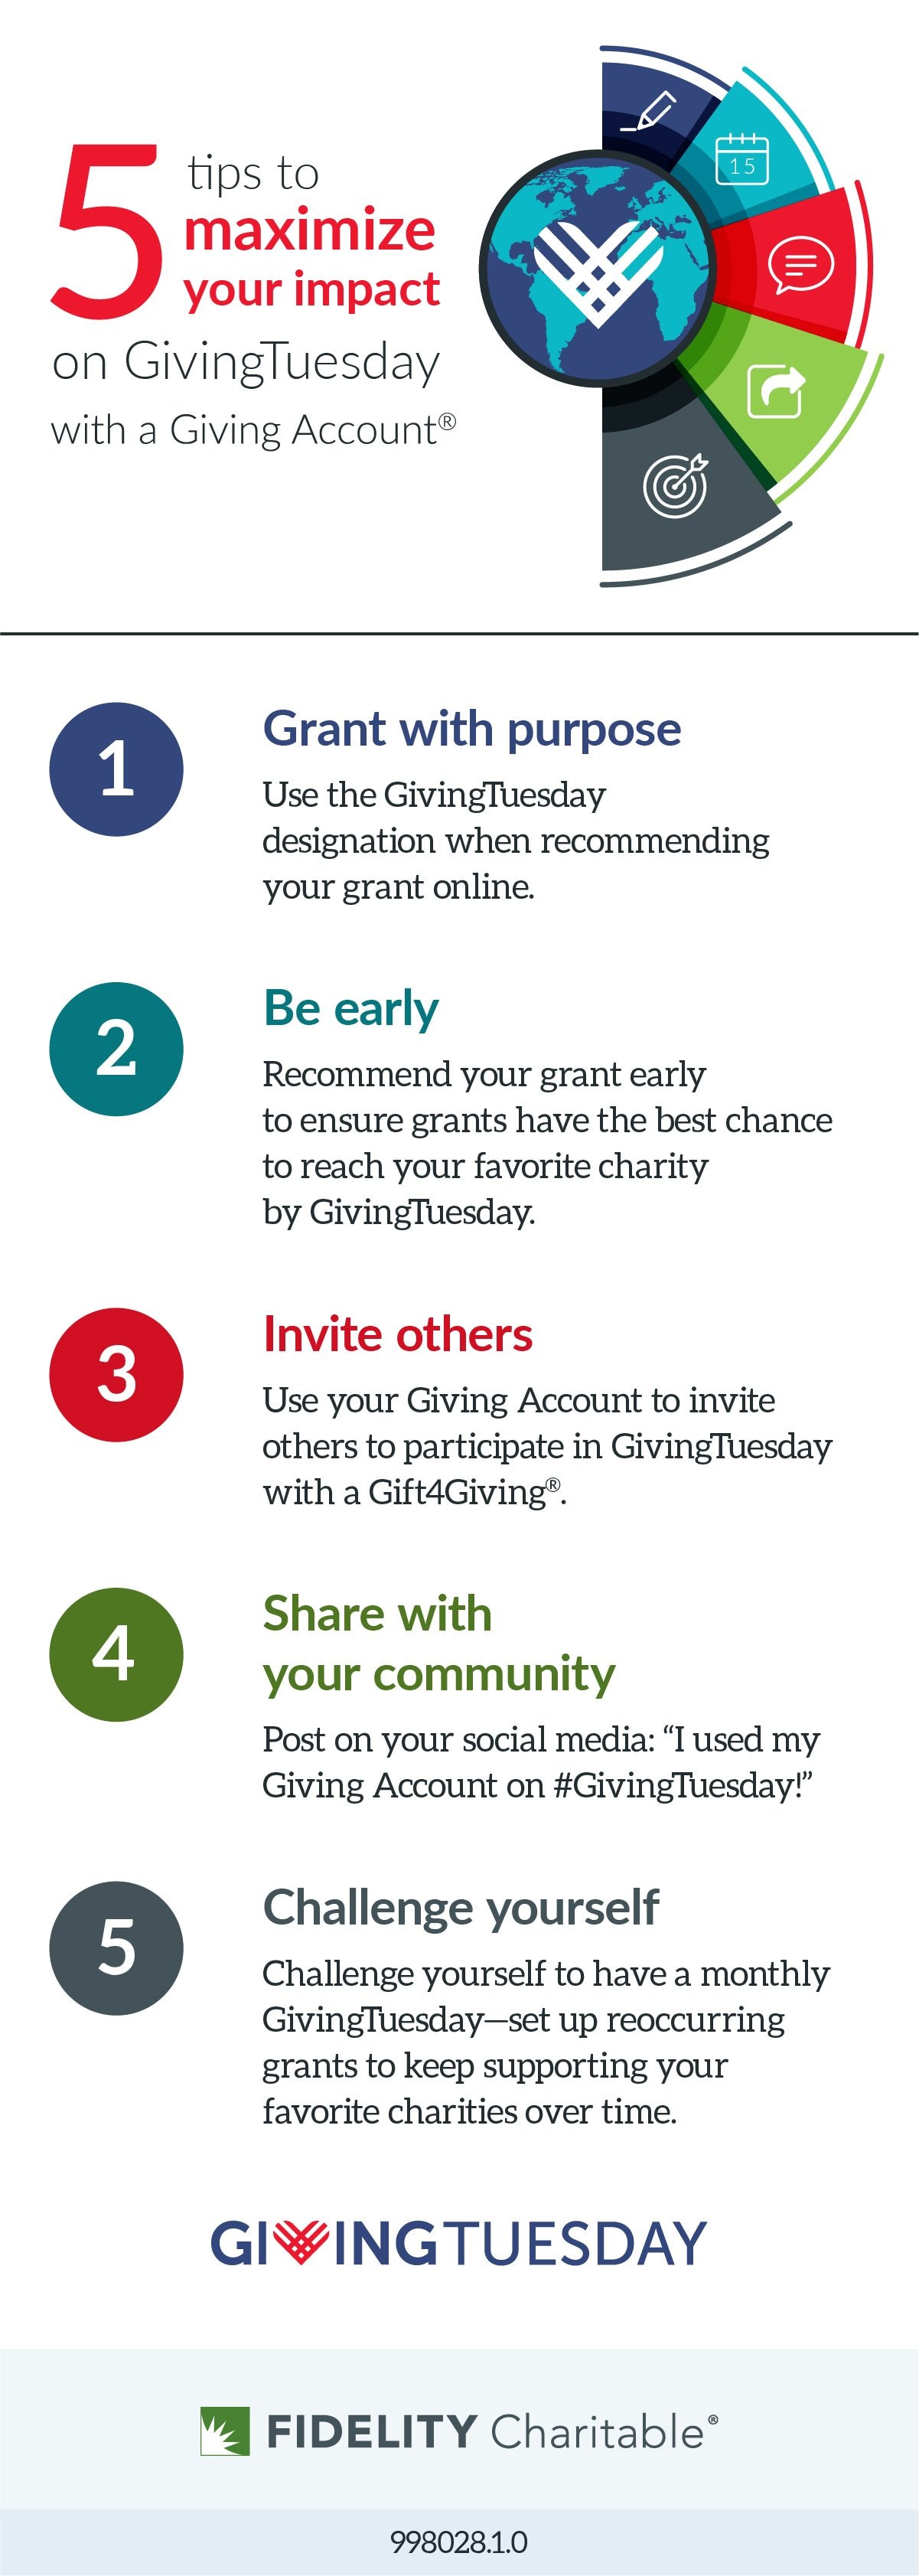 5 tips to maximize your impact for GivingTuesday 2022